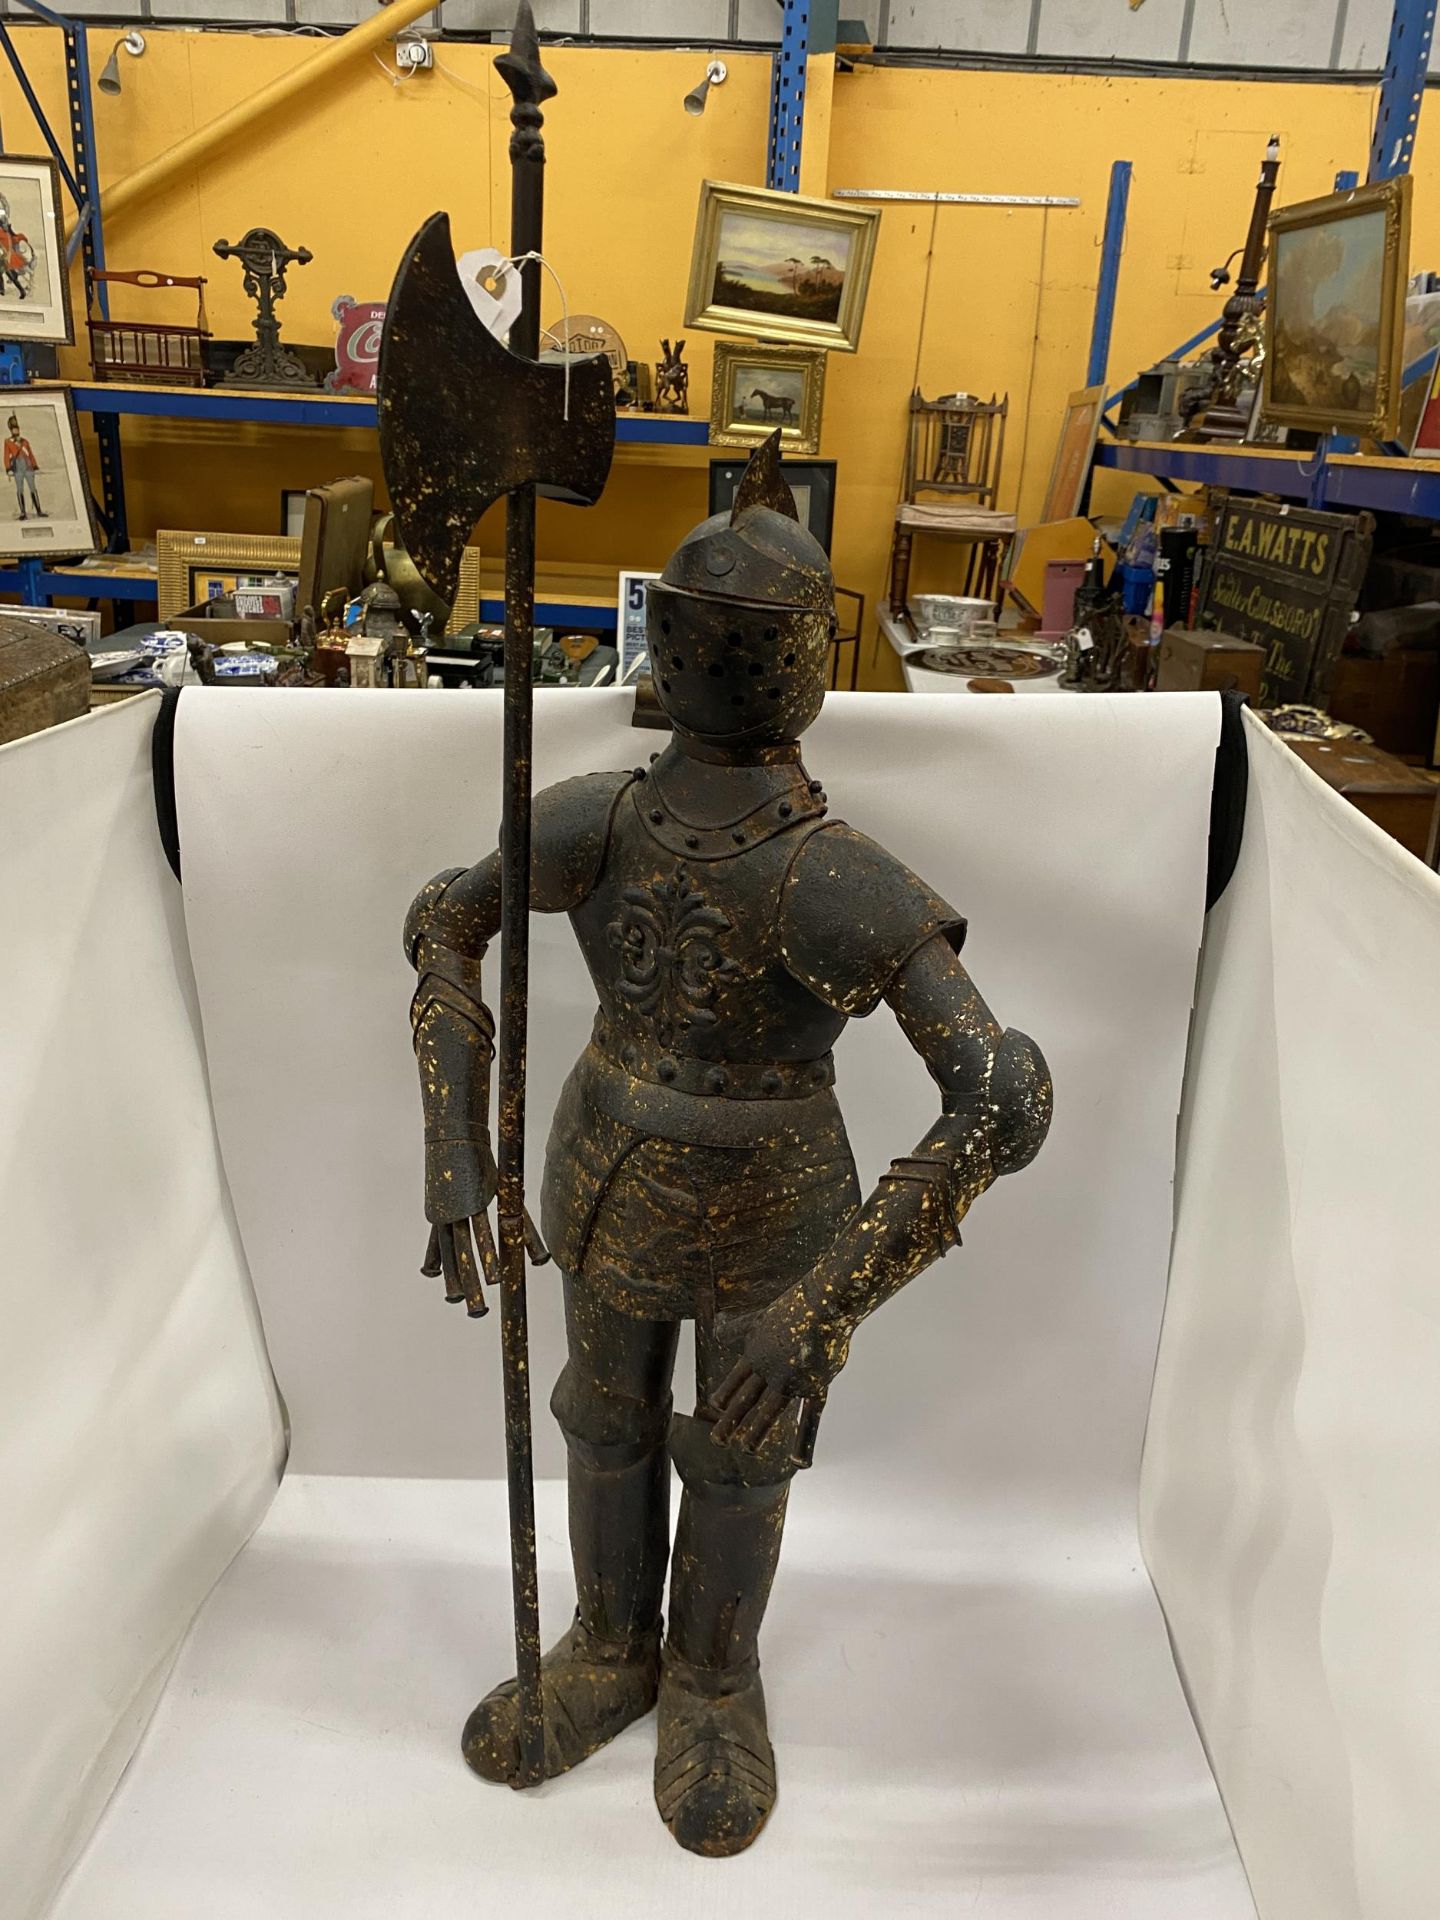 A LARGE DECORATIVE METAL MODEL OF A KNIGHT IN ARMOUR, HEIGHT 89.5CM